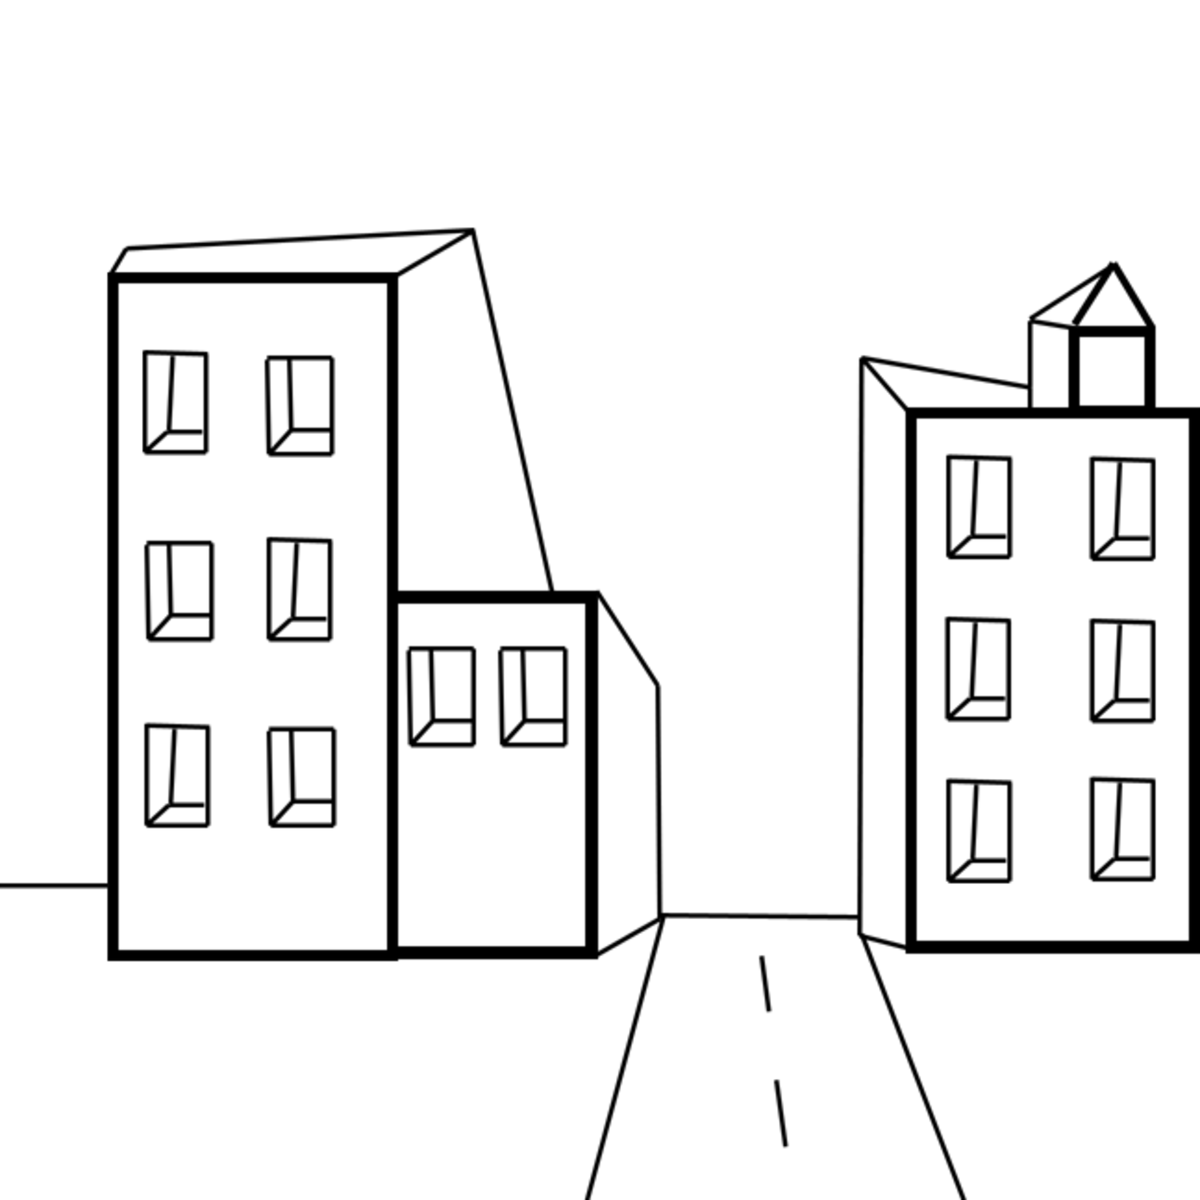 How to Do a Simple SinglePoint Perspective Drawing